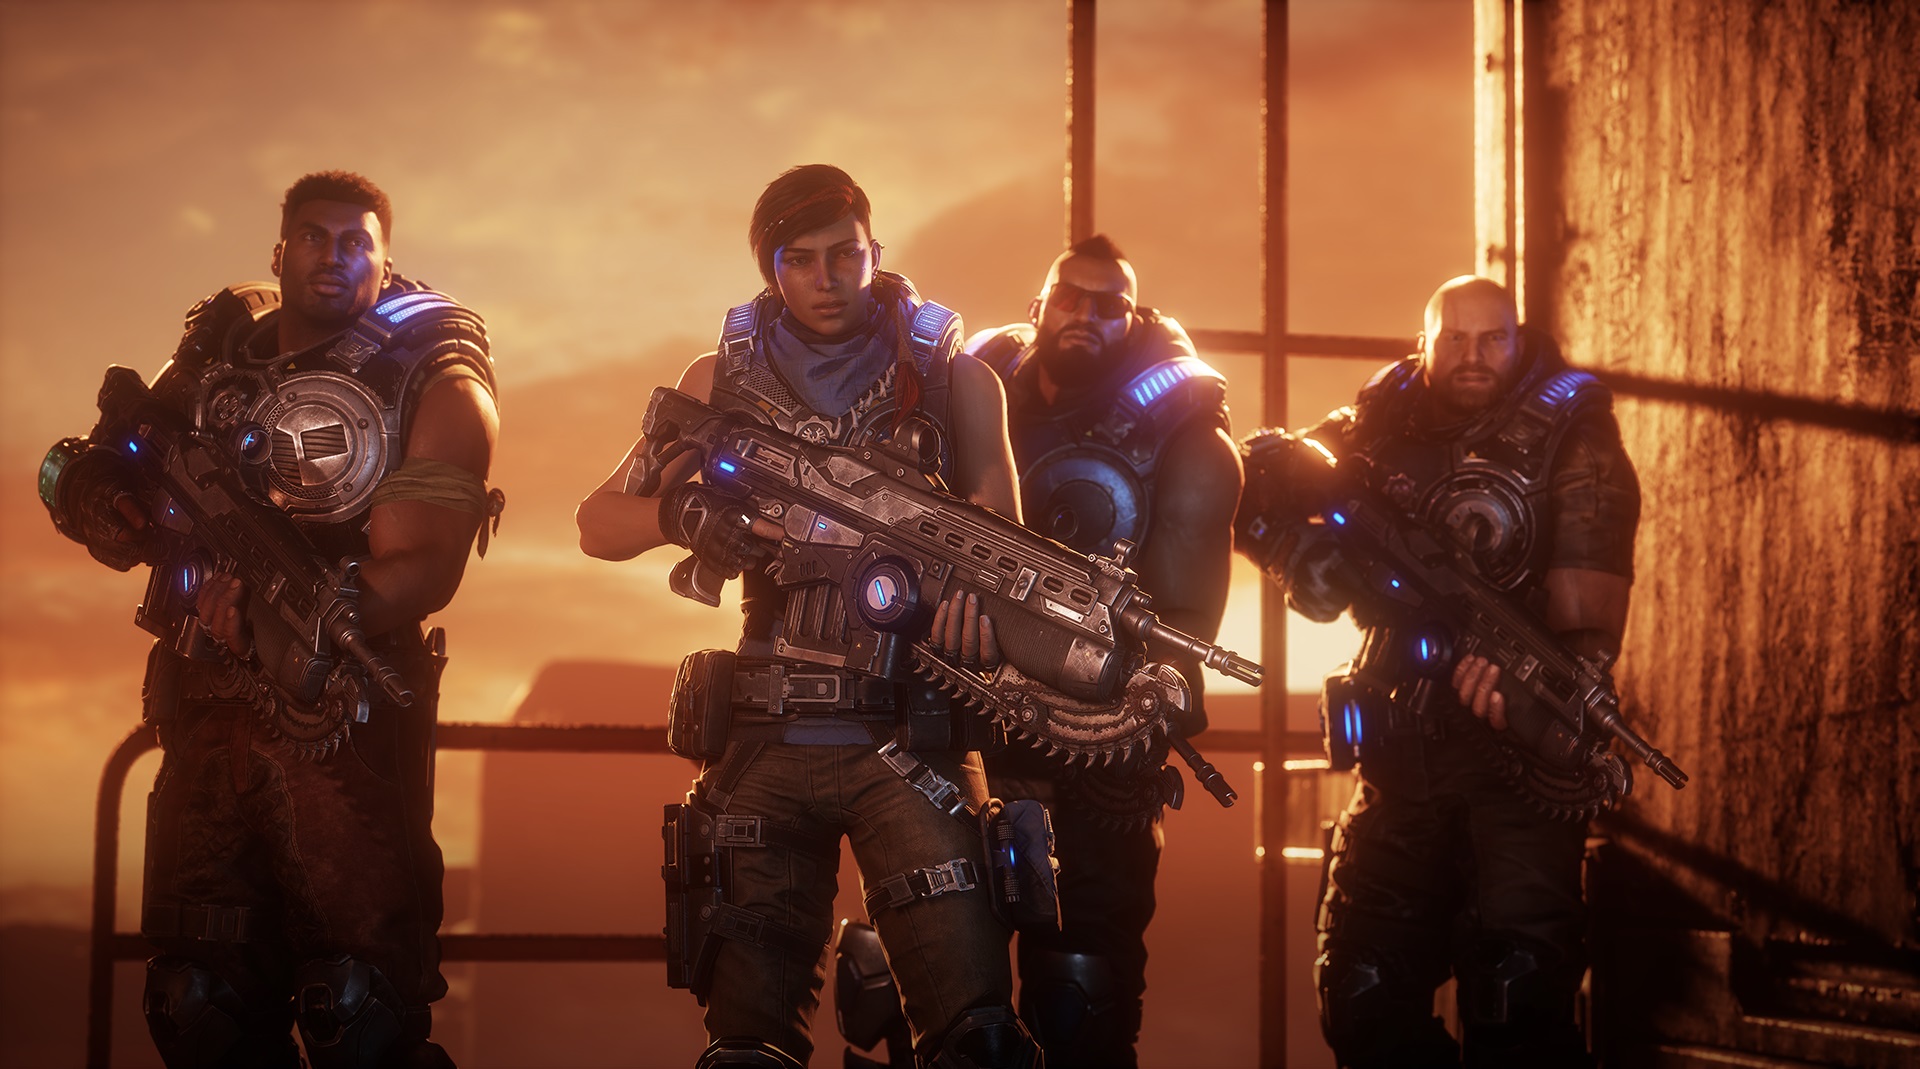 Gears 5 Launch - Desert Armored Squad